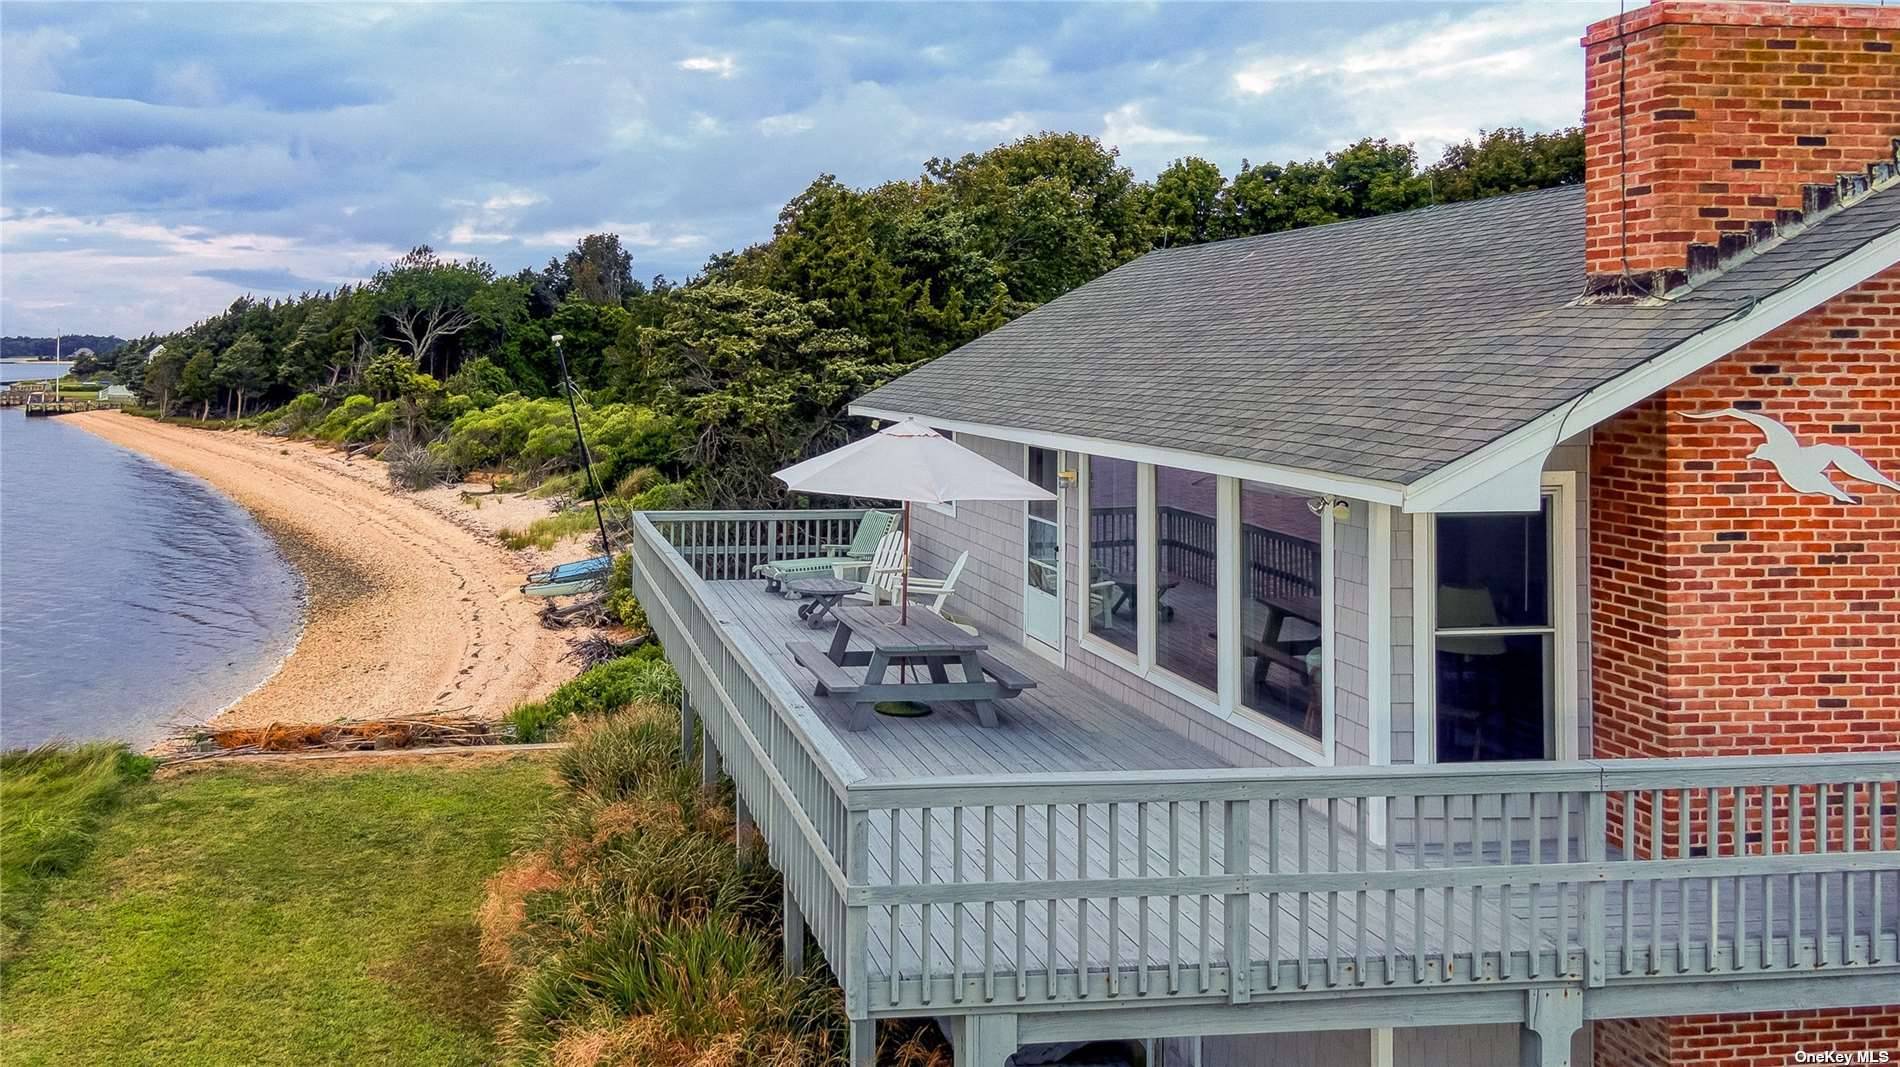 Welcome to 1355 Watersedge Way a delightful Bayfront home located on Little Peconic Bay in Southold.